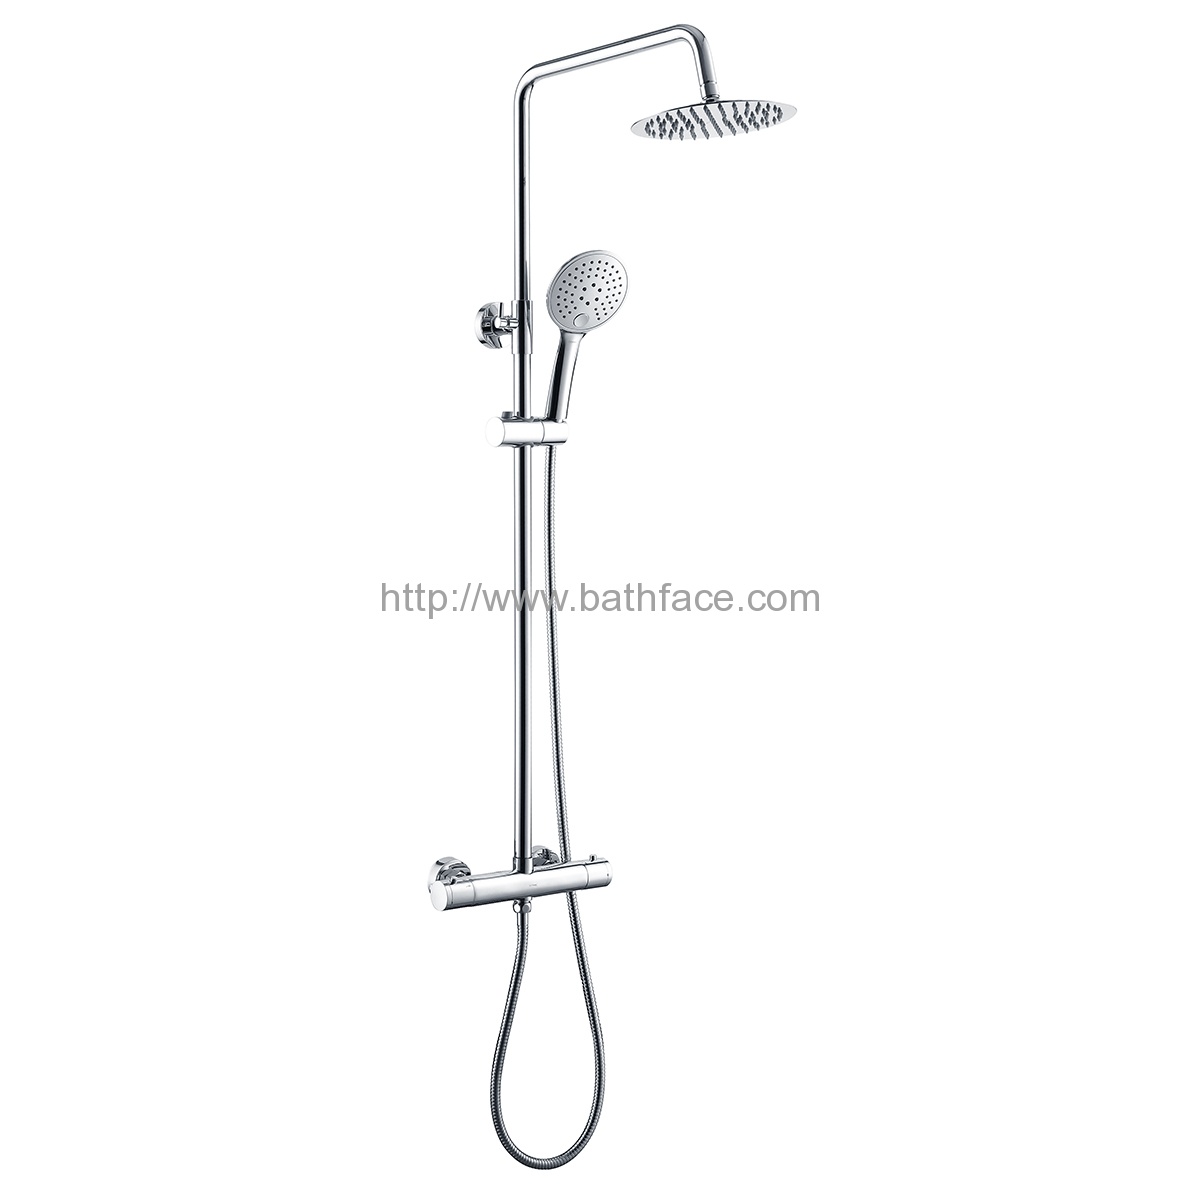 Lavatory Thermostatic Mixing Shower